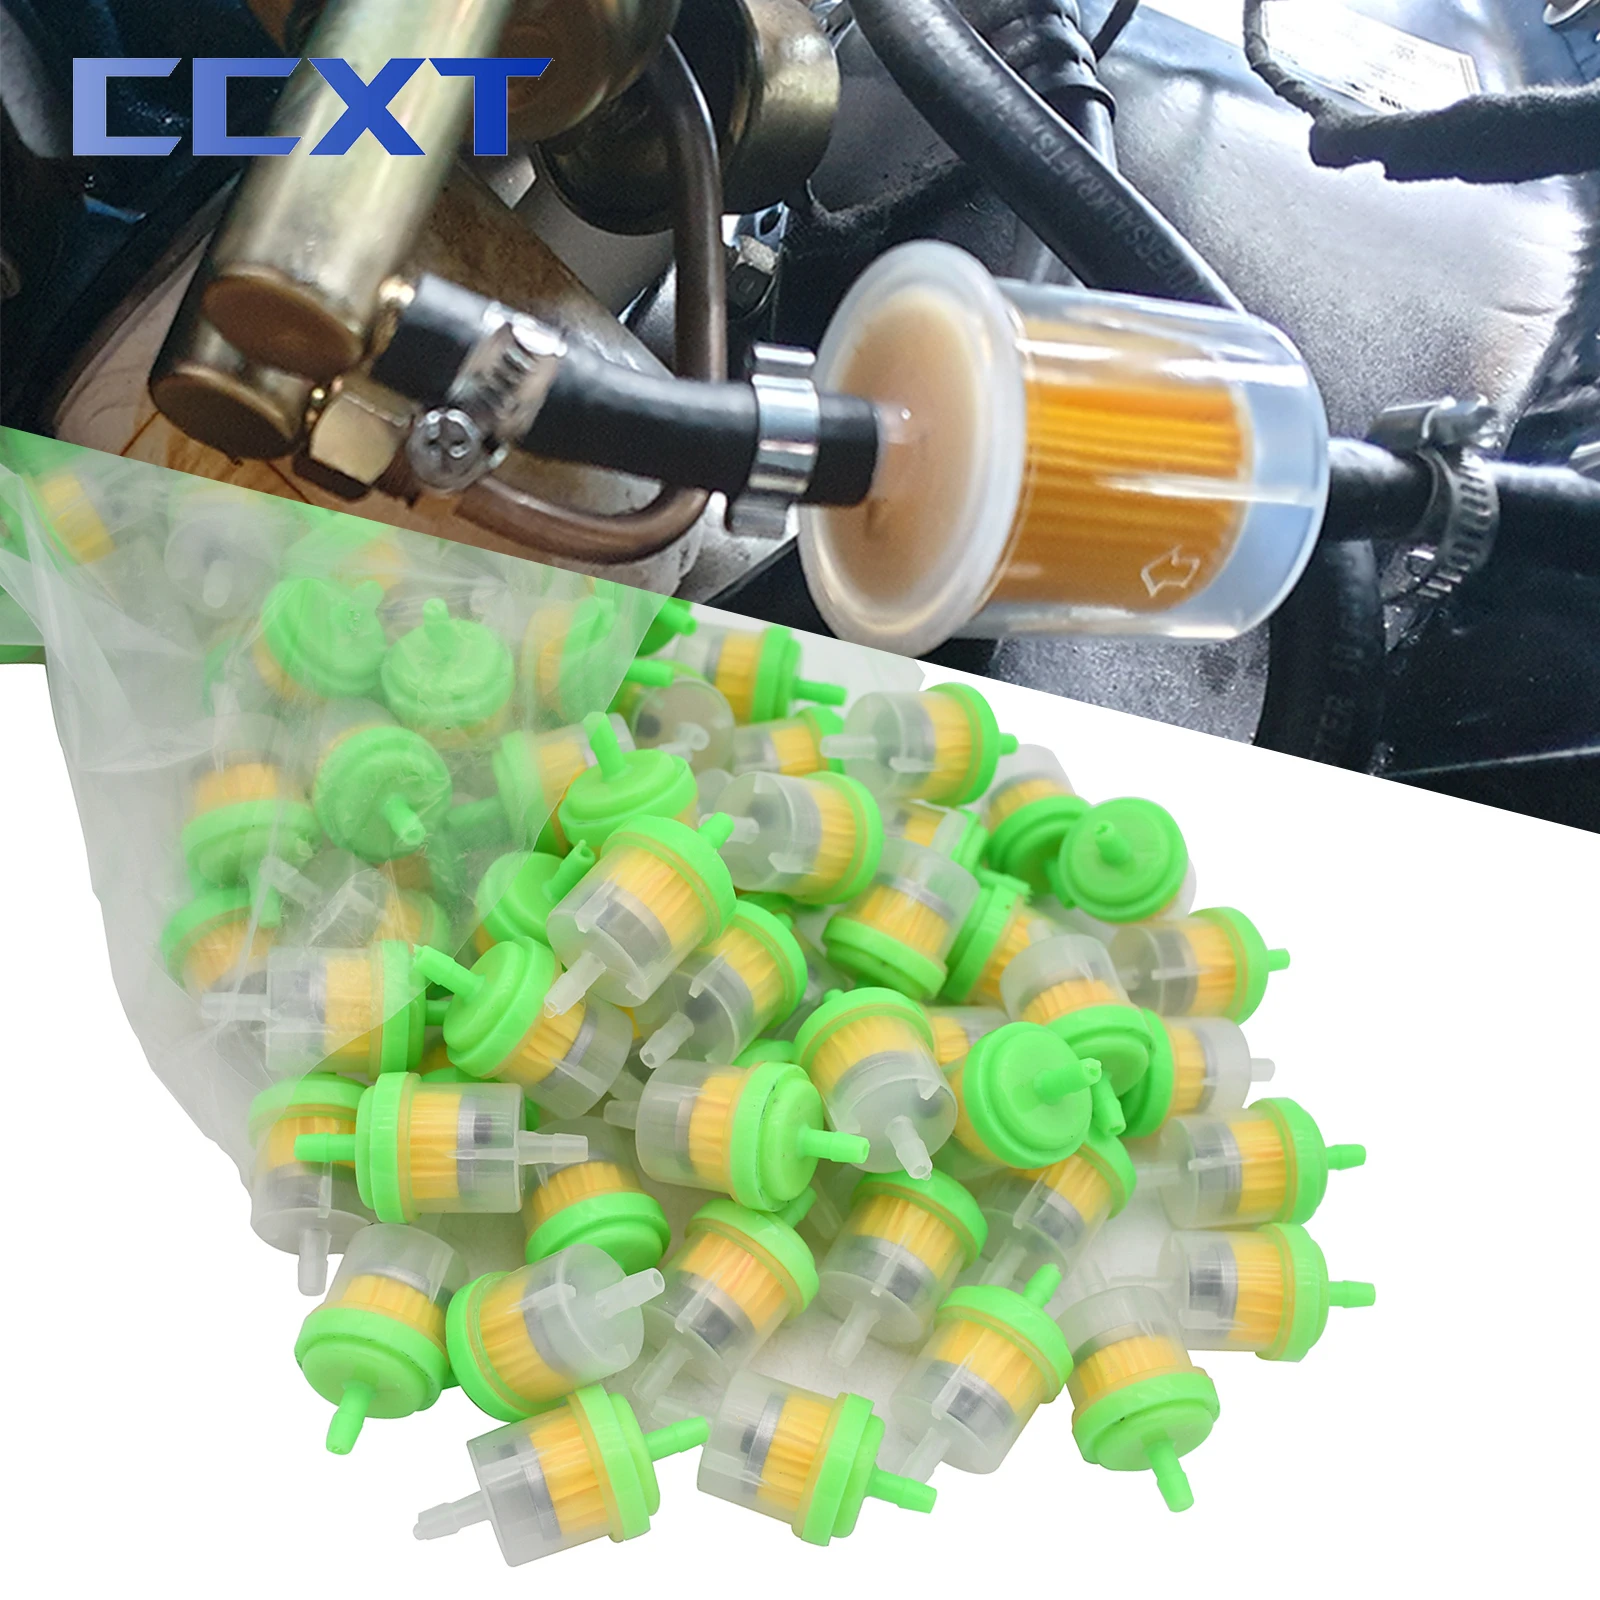 Fuel Gas Filters Gasoline Gas Fuel Oil Filter For Scooter Motorcycle KTM  Yamaha - $38.87